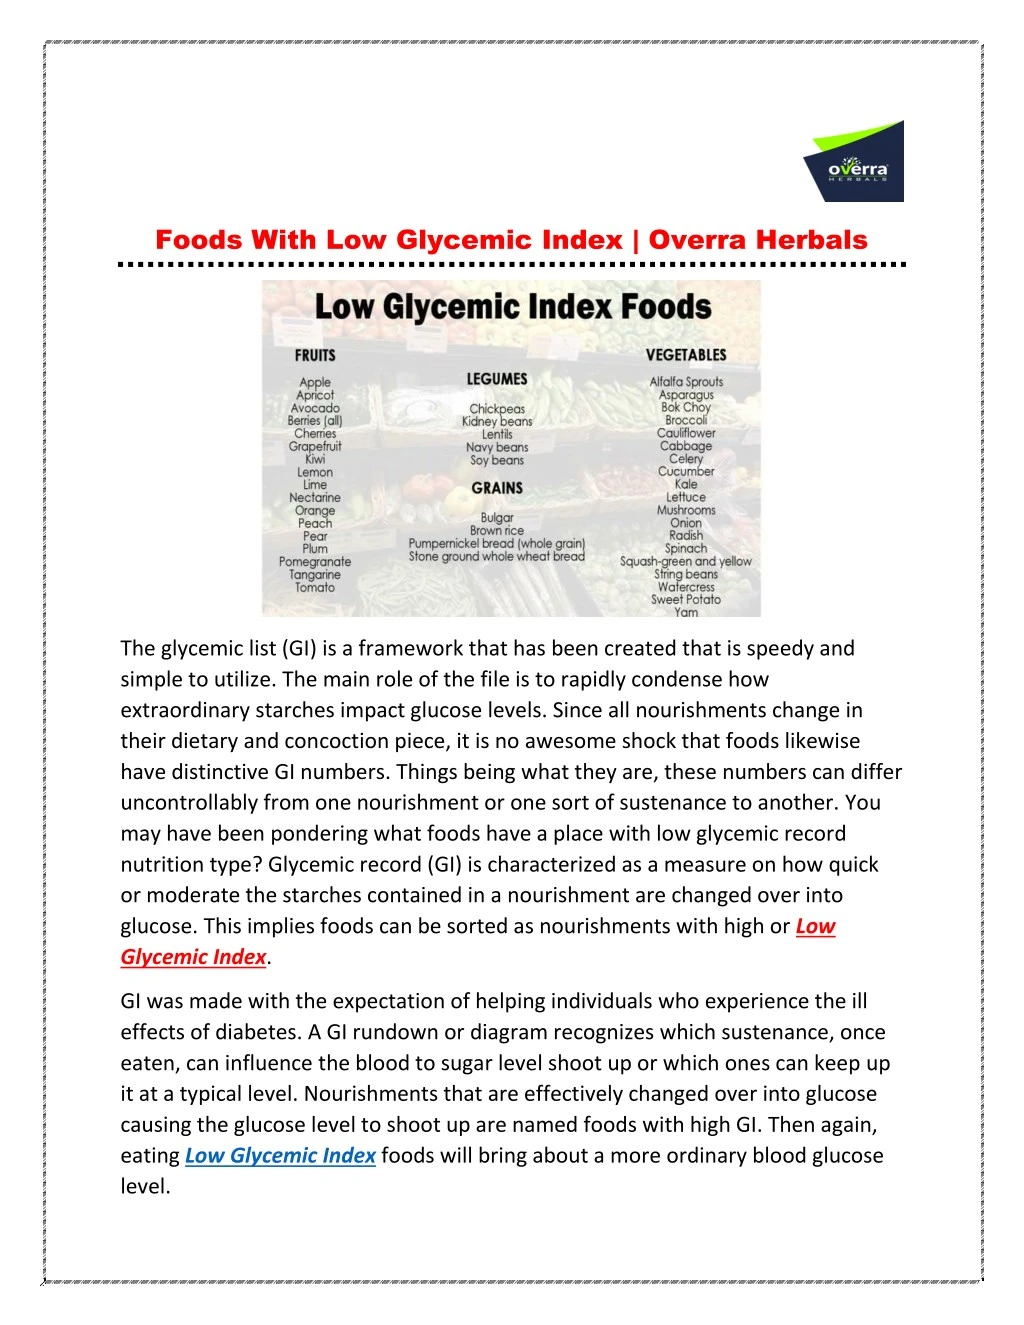 foods with low glycemic index overra herbals